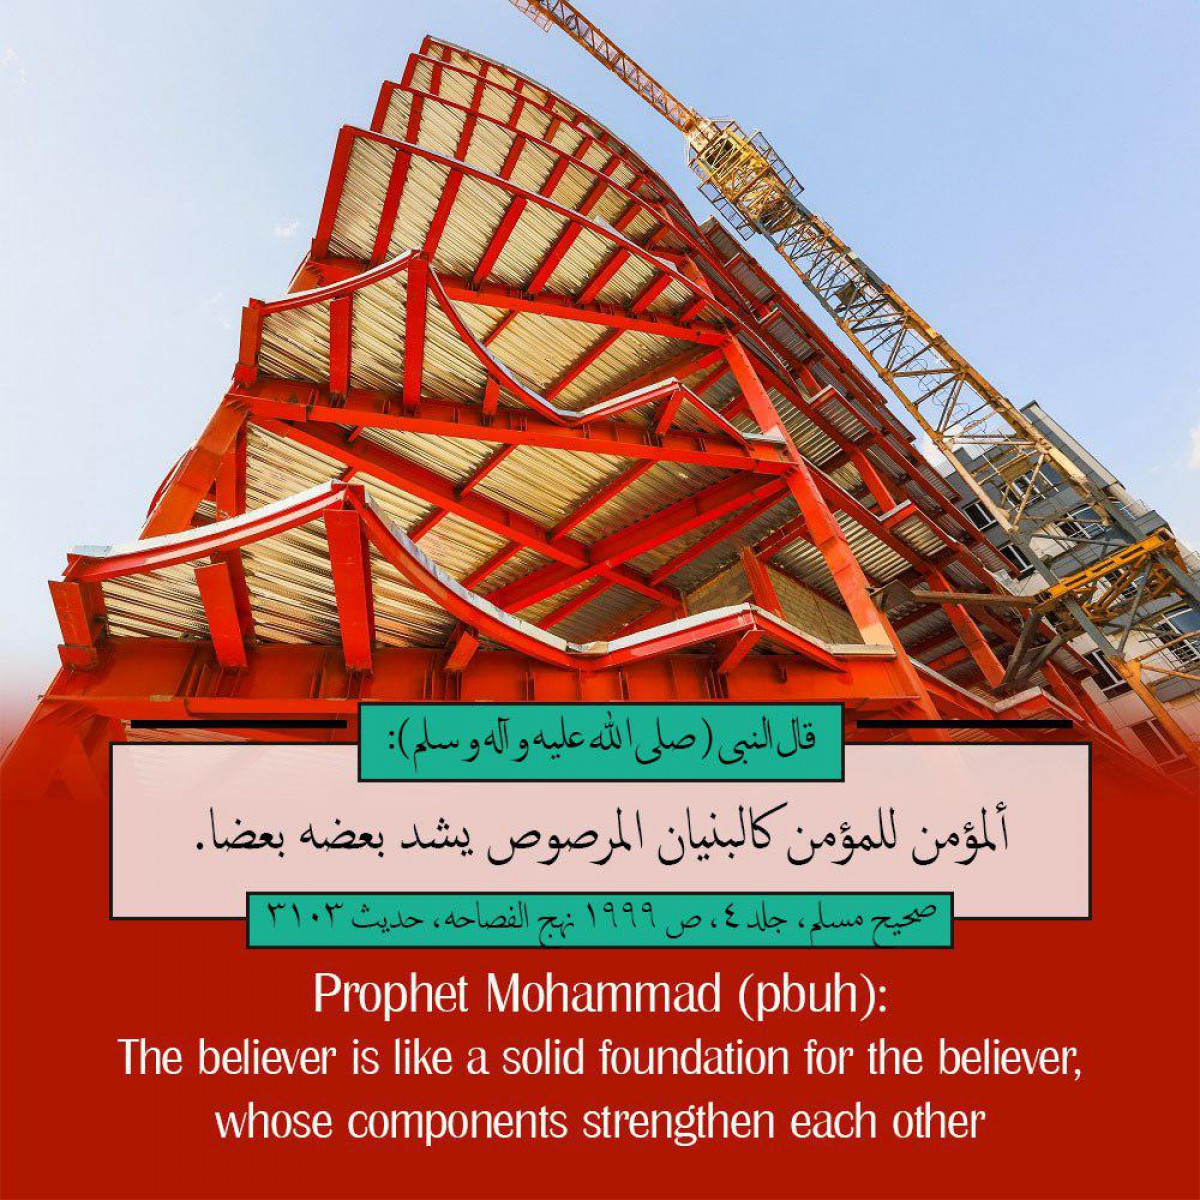 Prophet Mohammad (pbuh): The believer is like a solid foundation for the believer, whose components strengthen each other